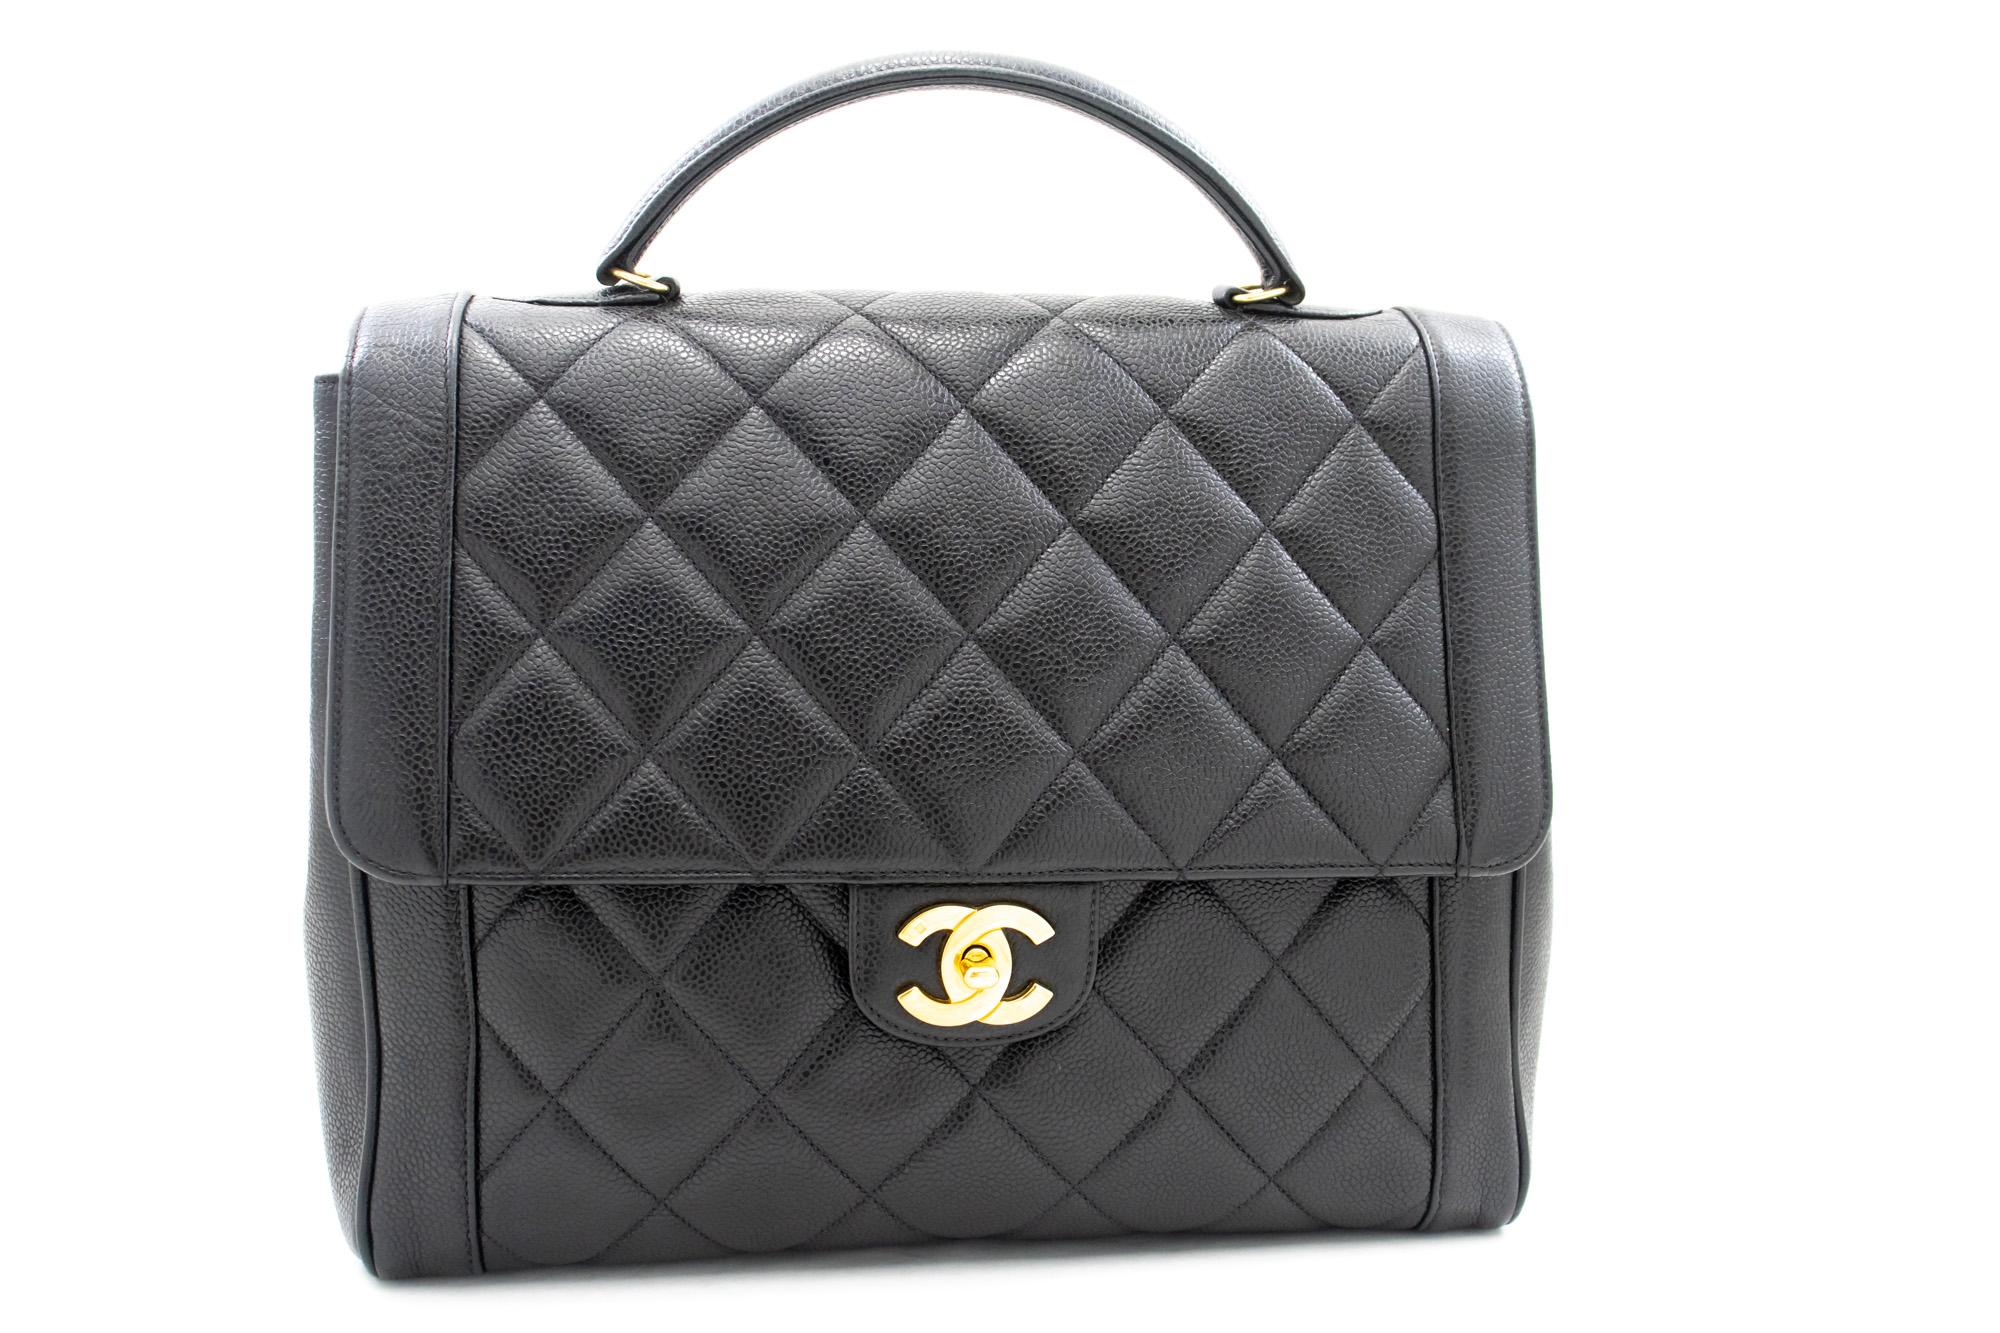 An authentic CHANEL Caviar Handbag Top Handle Bag Kelly Black Flap Leather Gold. The color is Black. The outside material is Leather. The pattern is Solid. This item is Vintage / Classic. The year of manufacture would be 1994-1996.
Conditions &